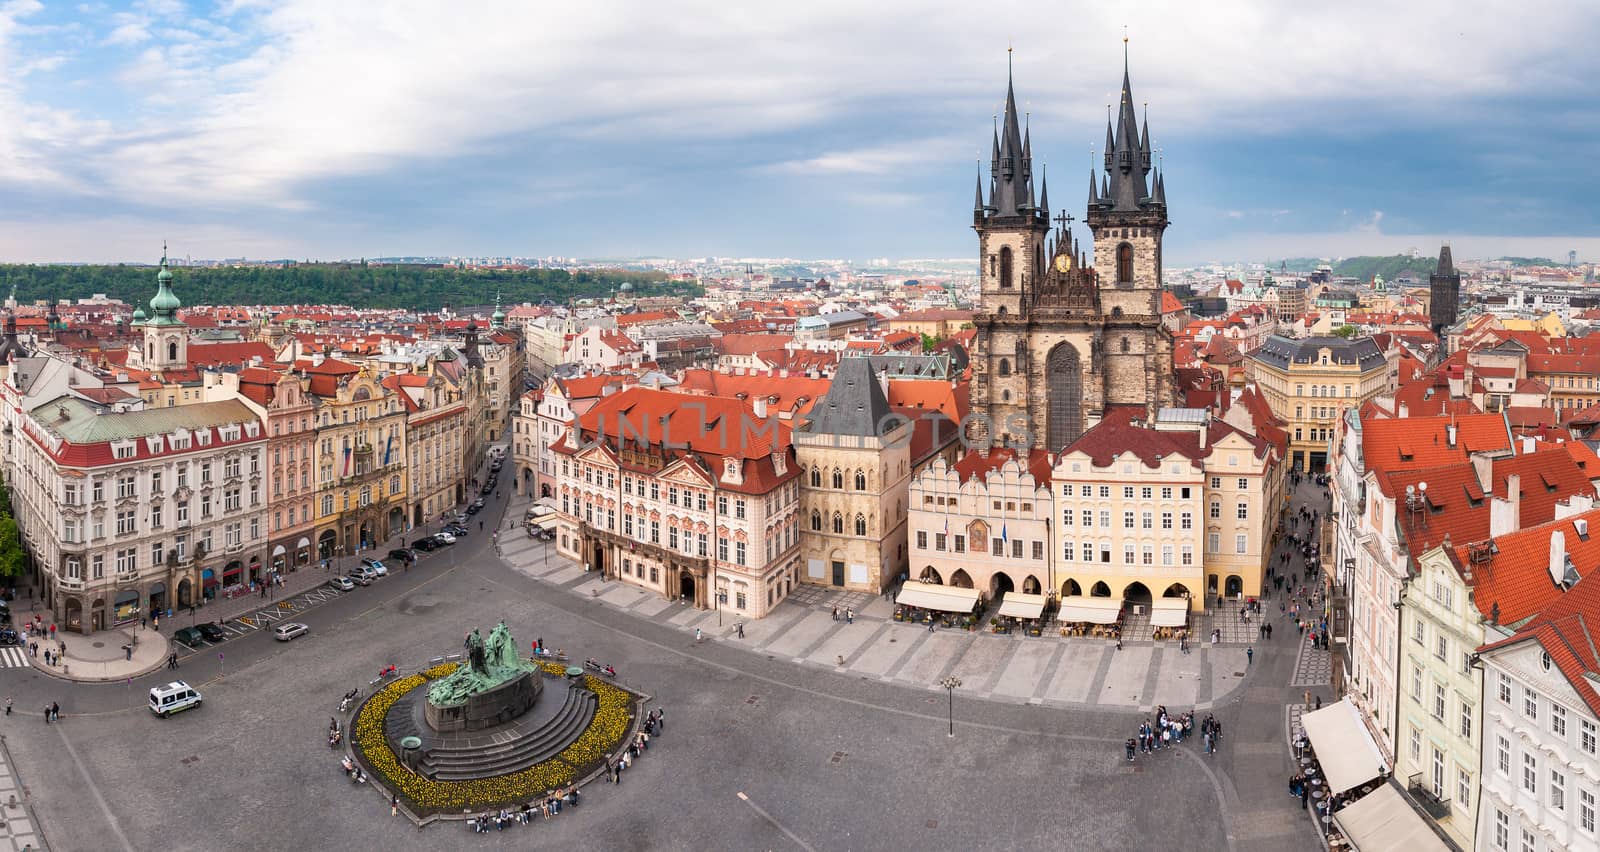 Old Town Square in Prague by mkos83